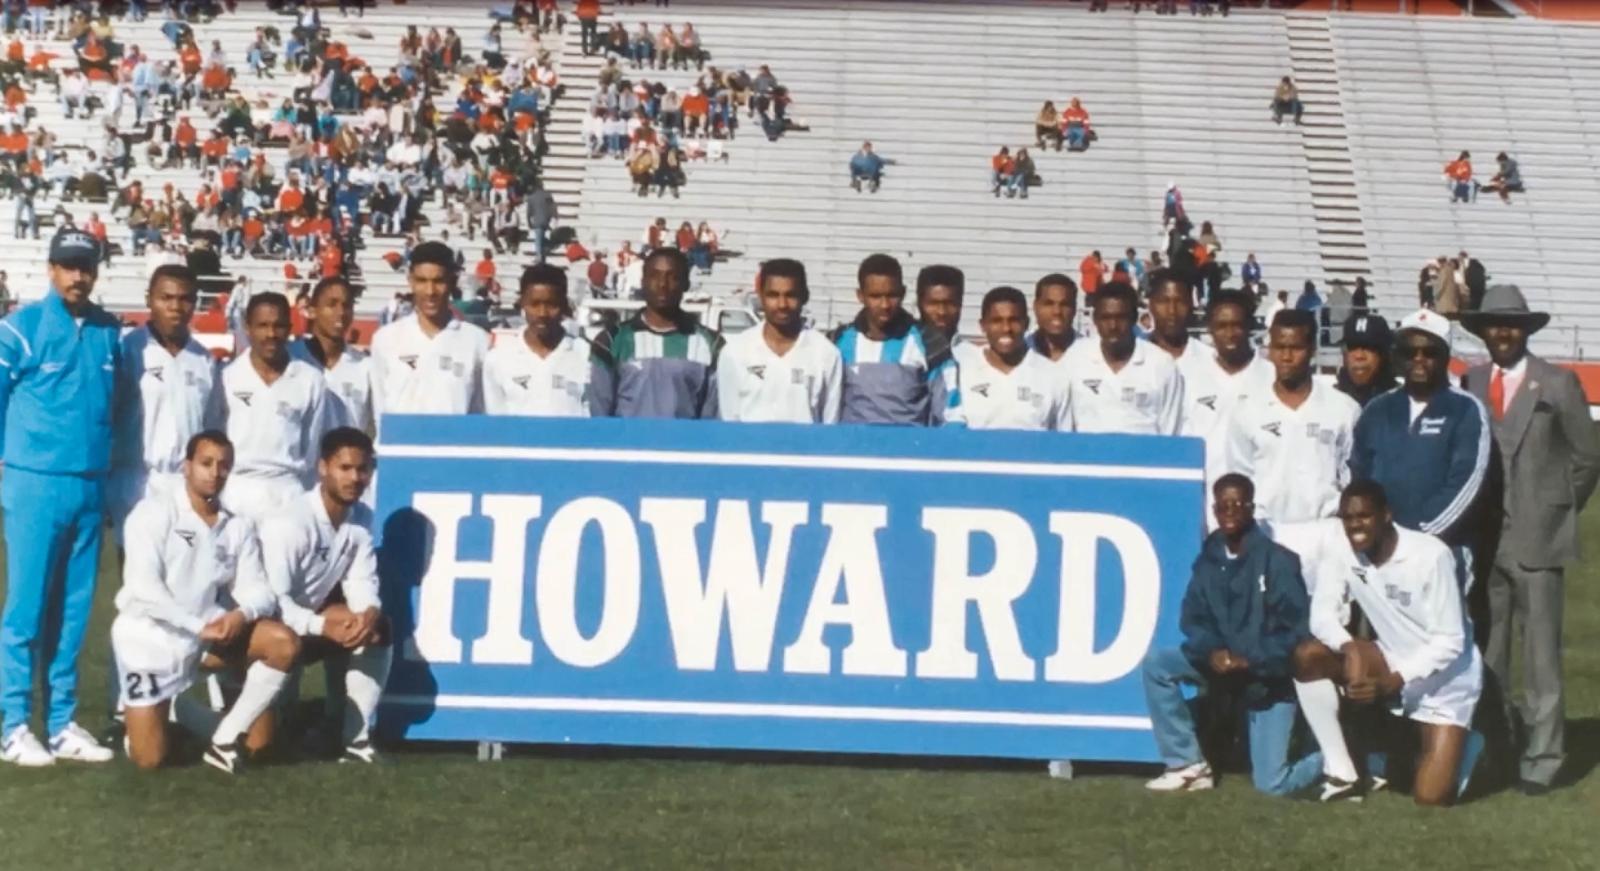 Dr. Frederick managed the Howard soccer team (in the dark blue jacket kneeling by the letter D)